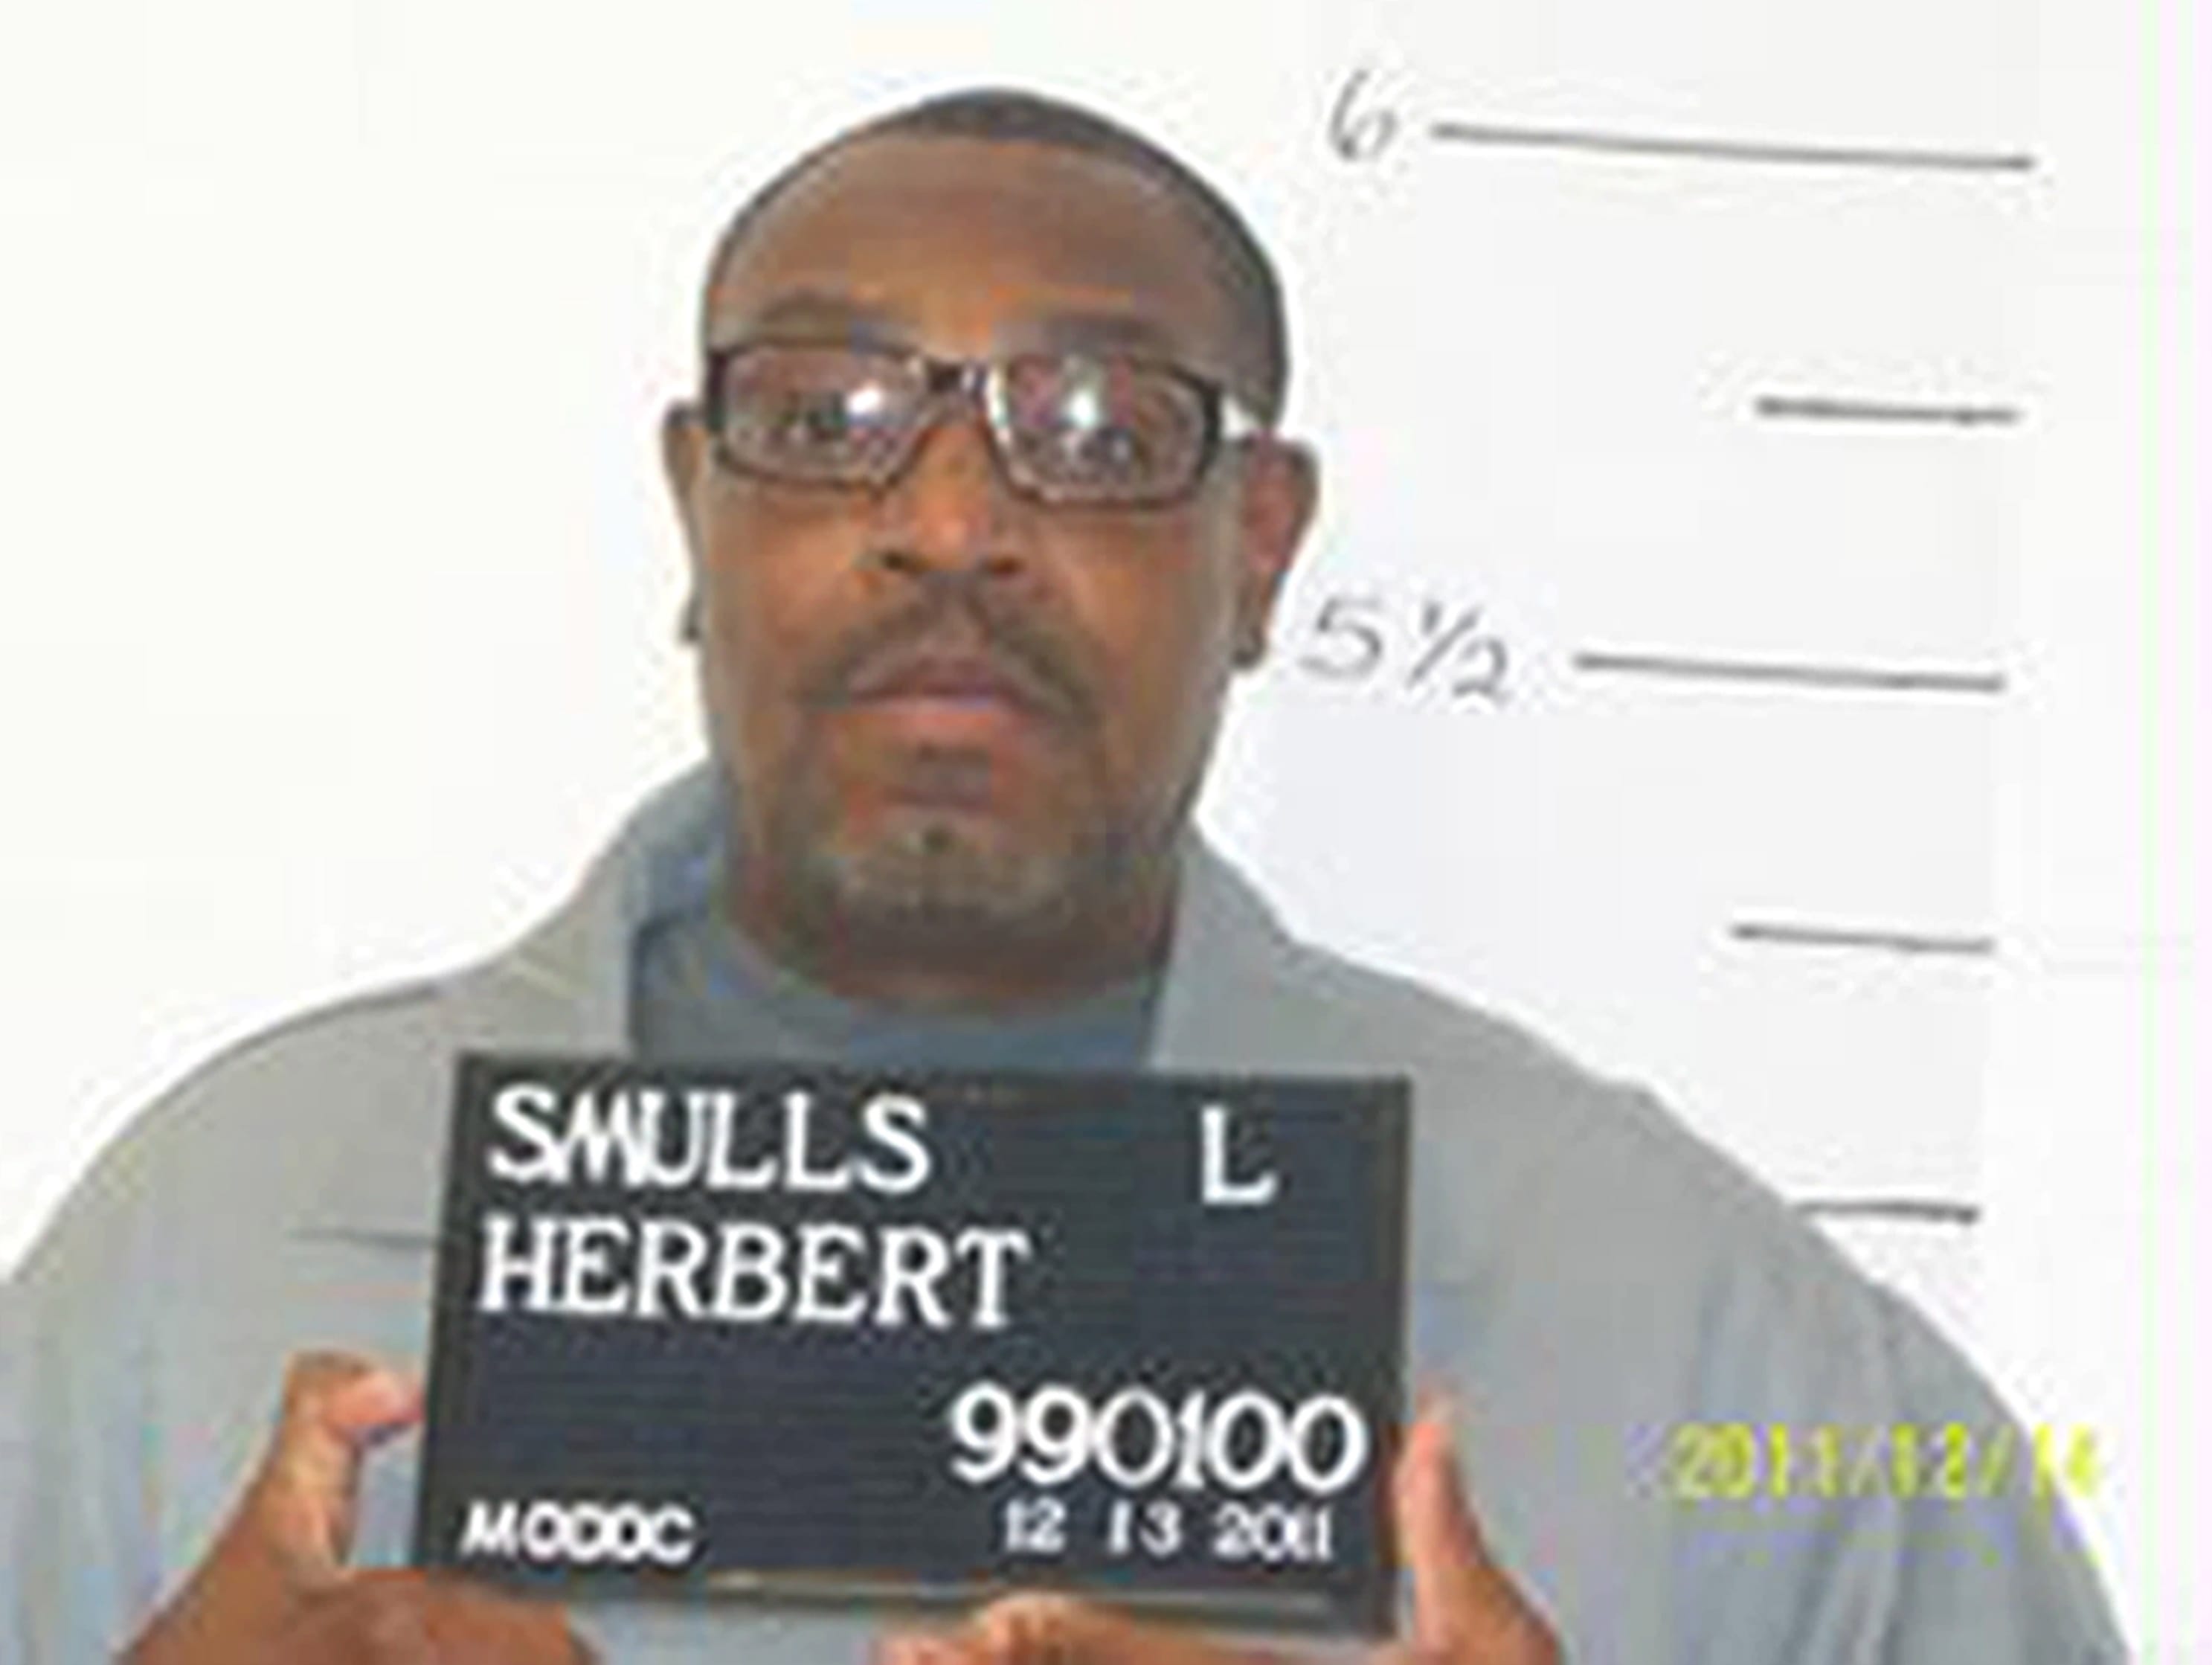 Missouri death-row inmate Herbert Smulls  was put to death by injection late Wednesday night for killing St.